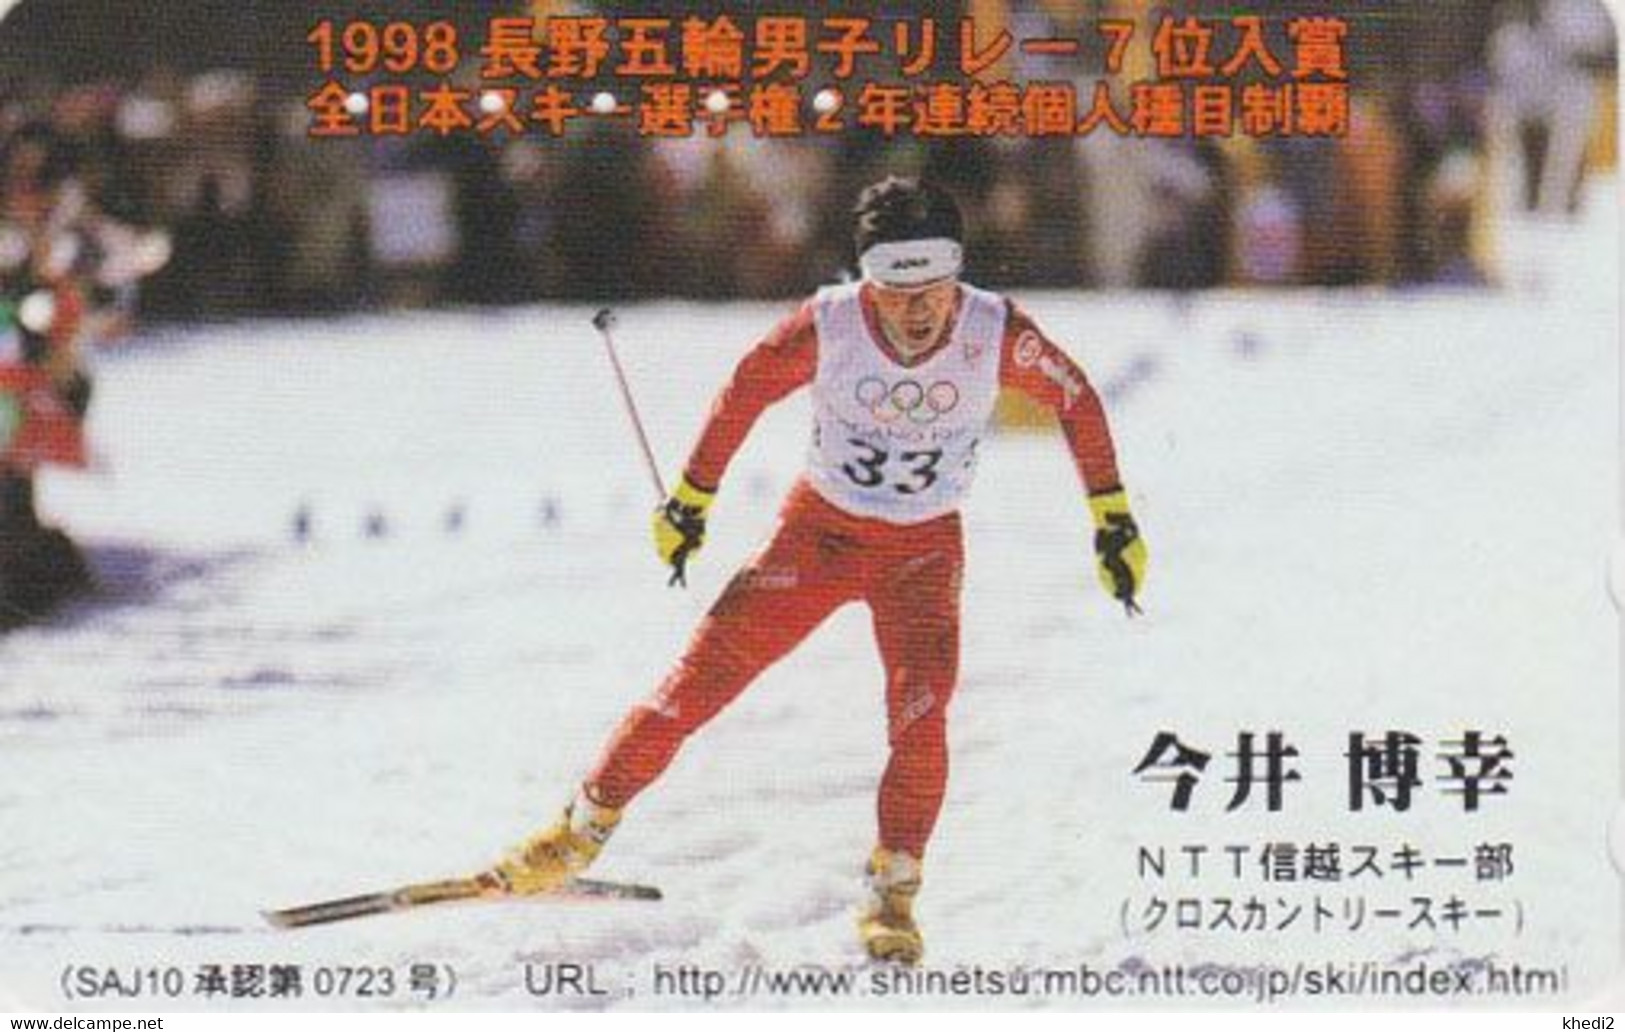 TC JAPON / 110-203839 - SPORT SKI / Jeux Olympiques JO NAGANO - Cross Country Olympic Games - JAPAN Free Phonecard  - 23 - Olympic Games